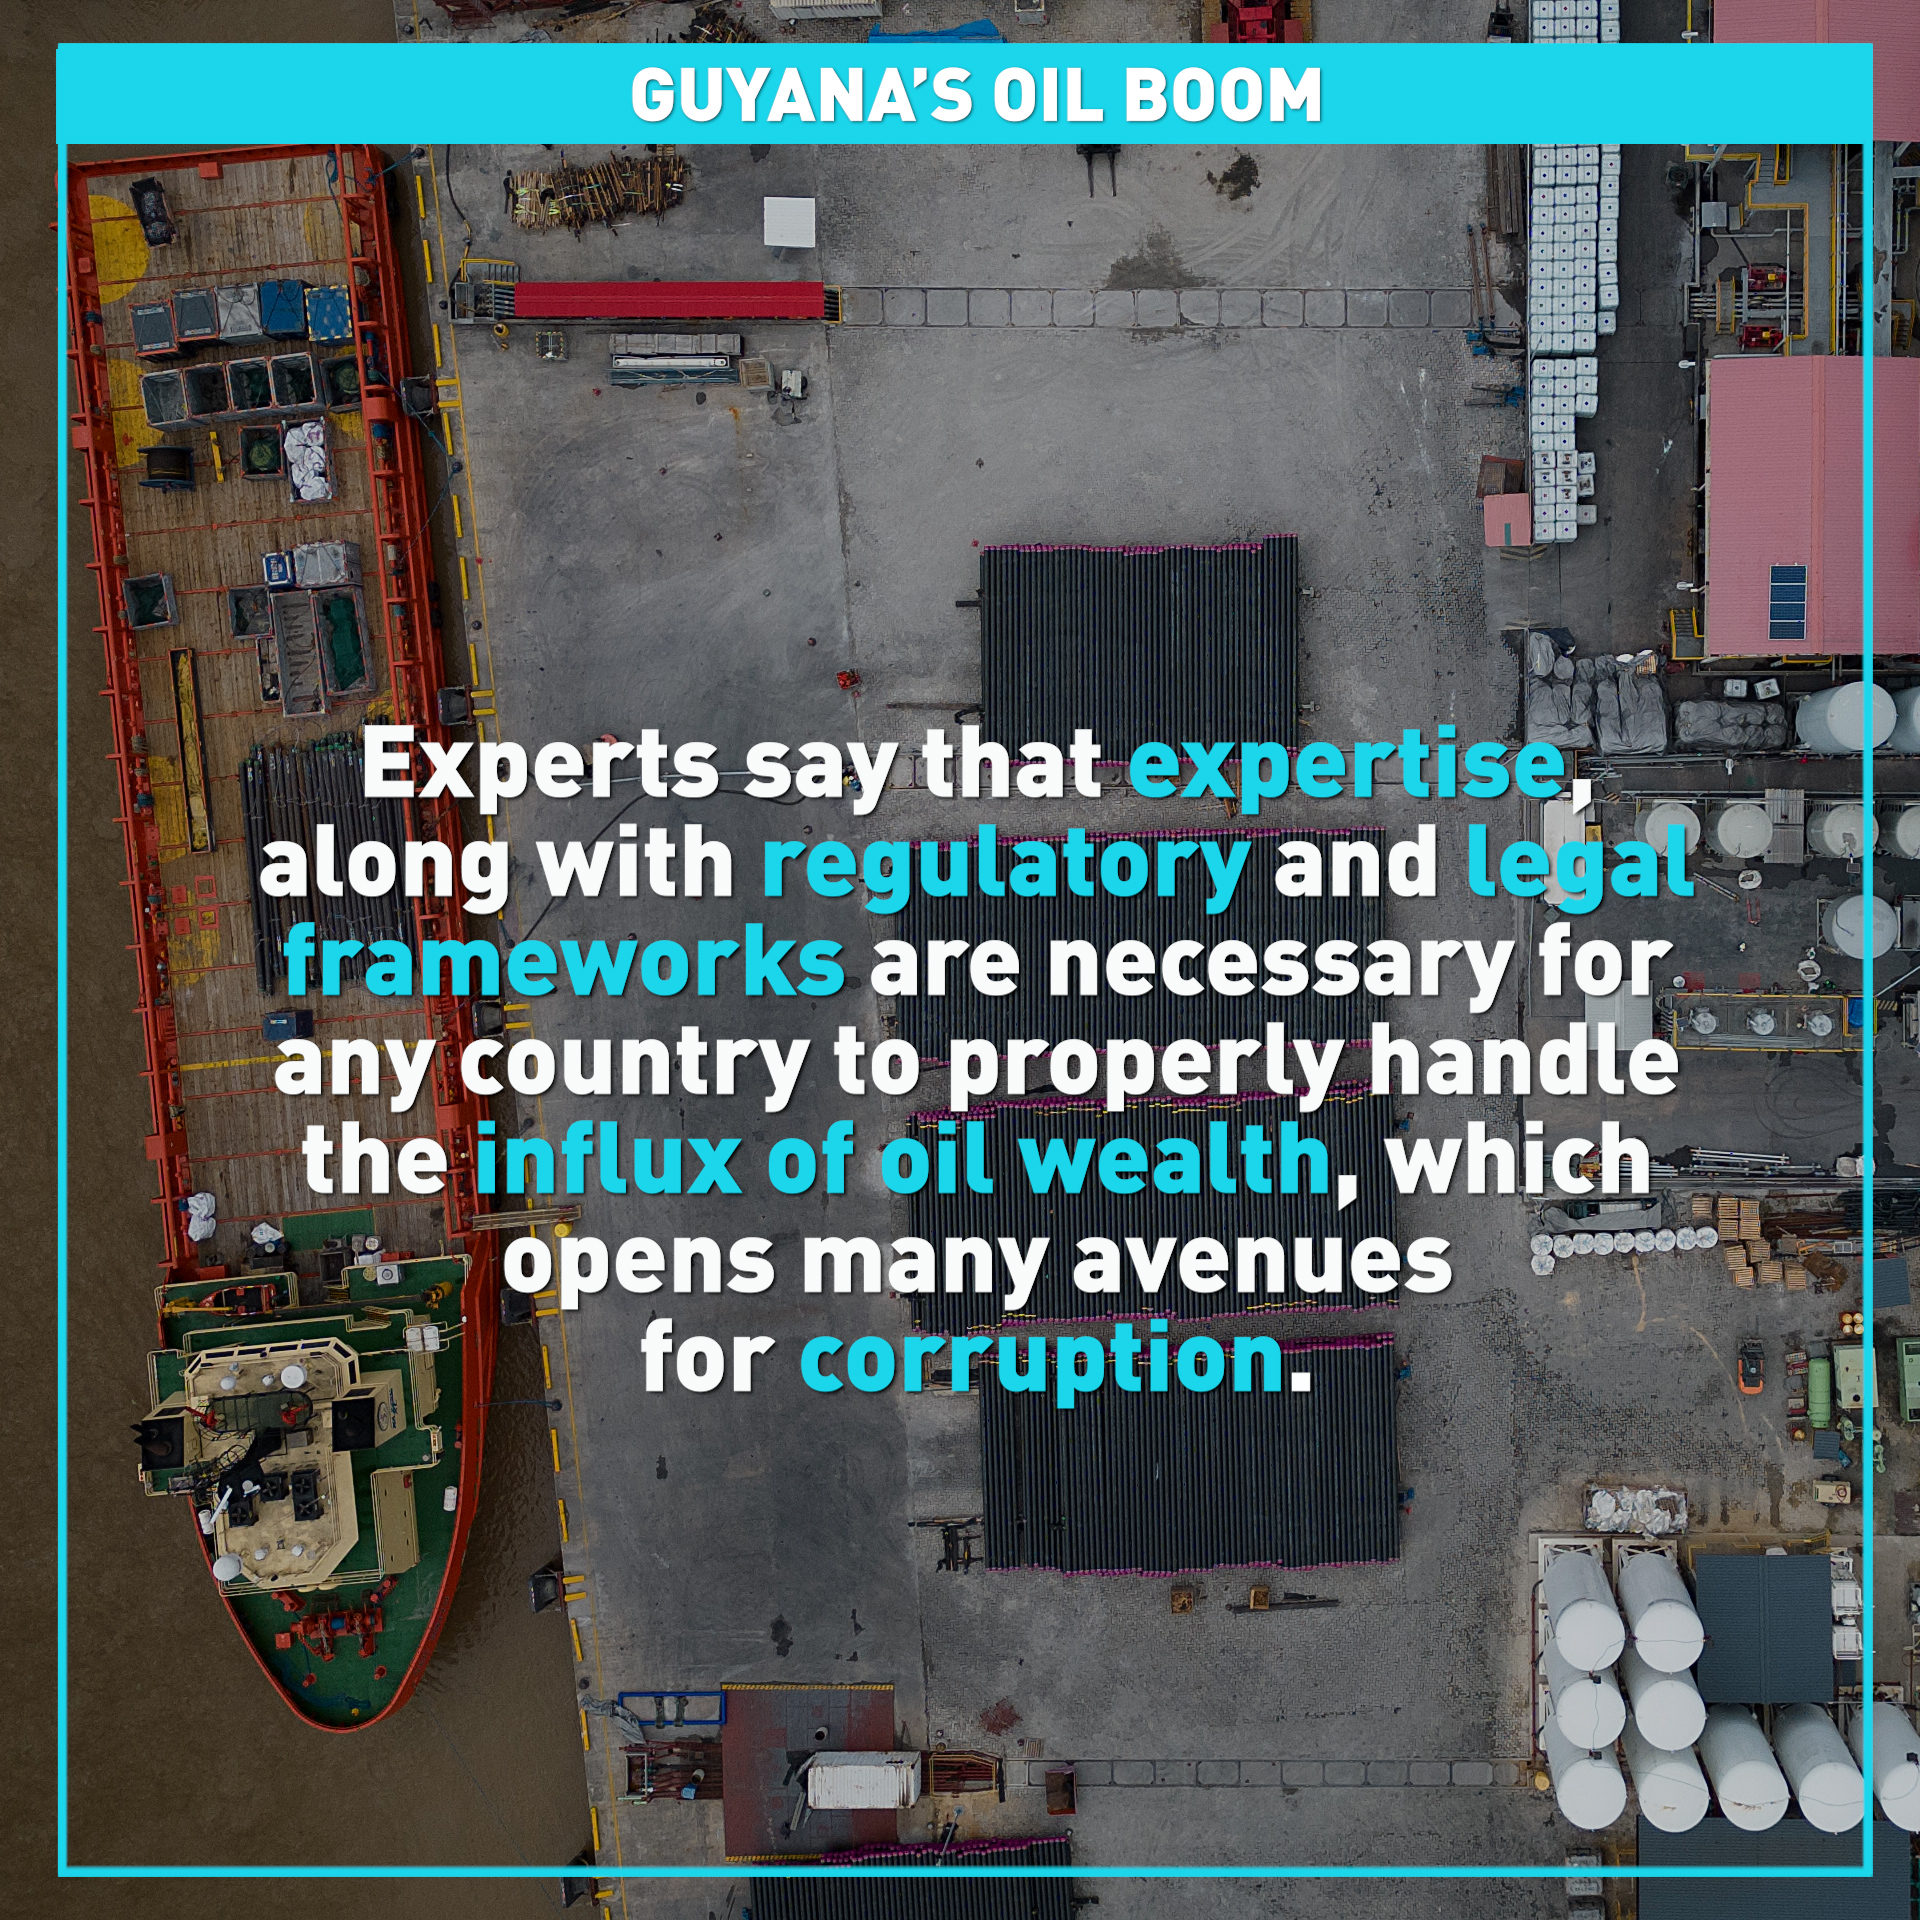 Guyana positioned to become fourth-largest offshore oil producer 